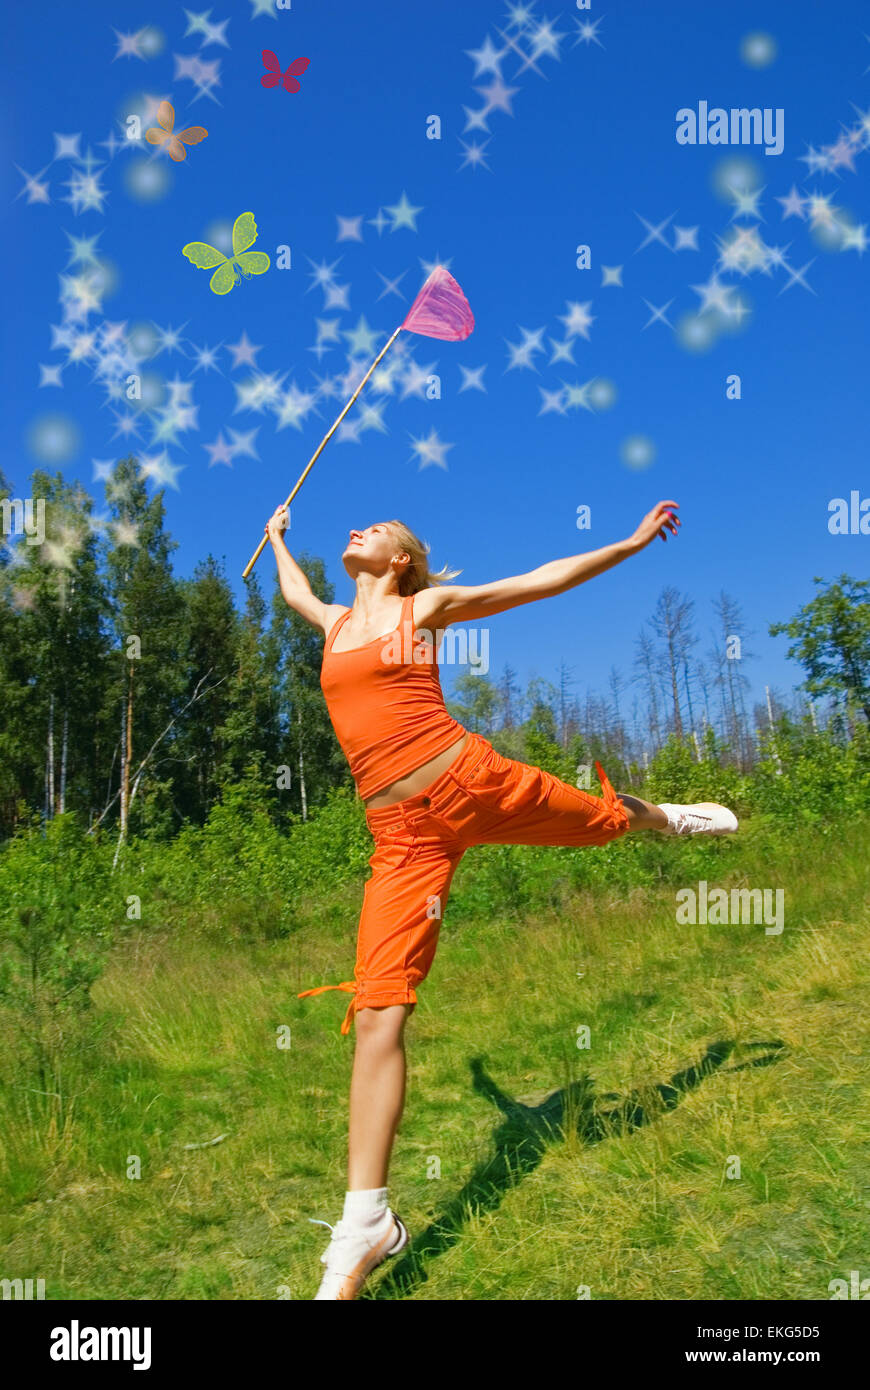 Beautiful girl with a net in her hand trying to catch magic